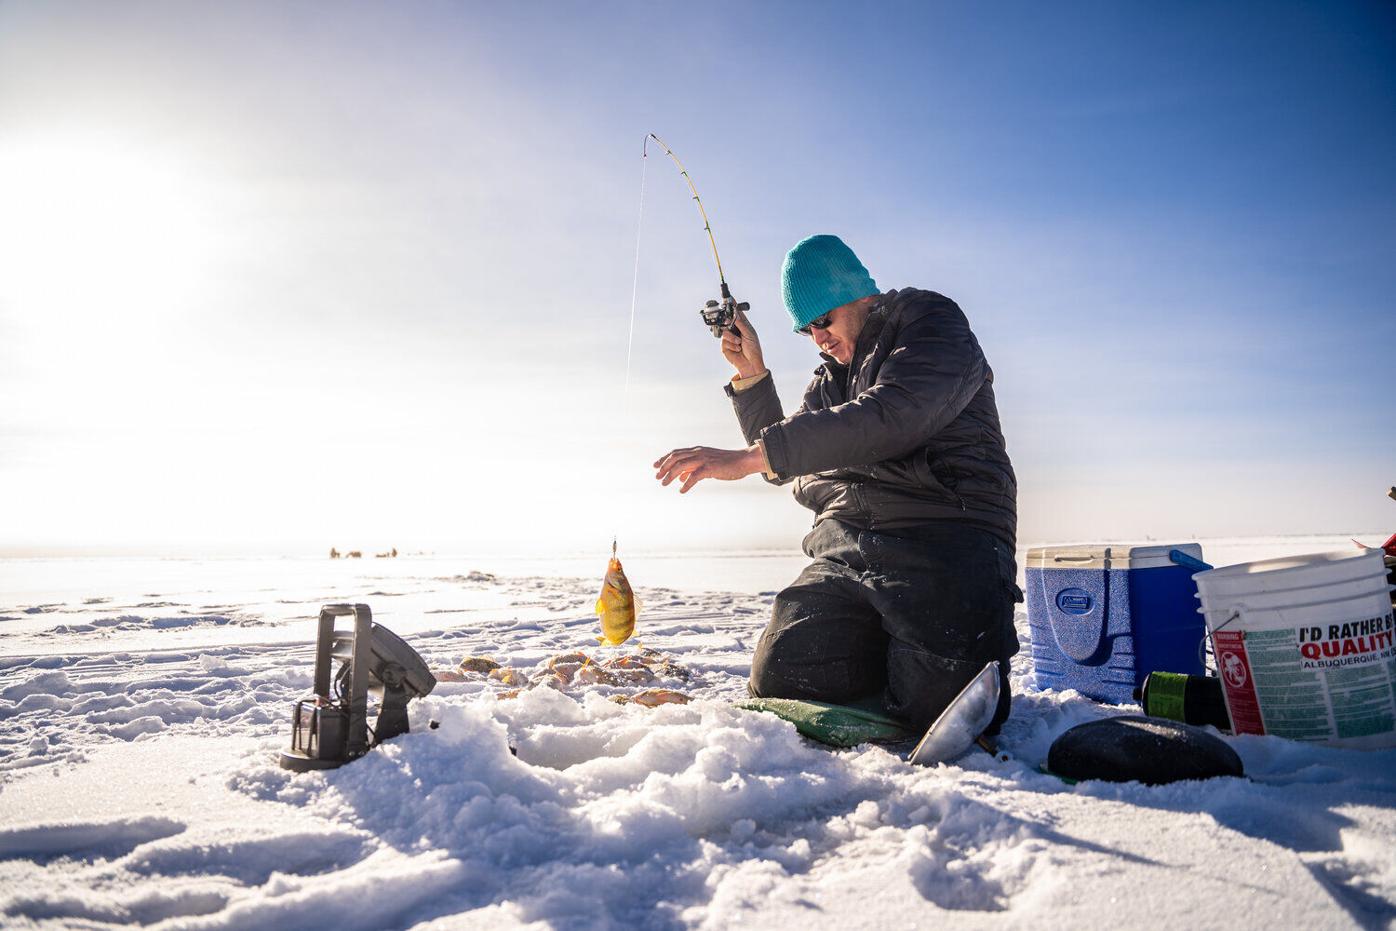 Ice fishing tournament scheduled for last Saturday in January, Outdoors